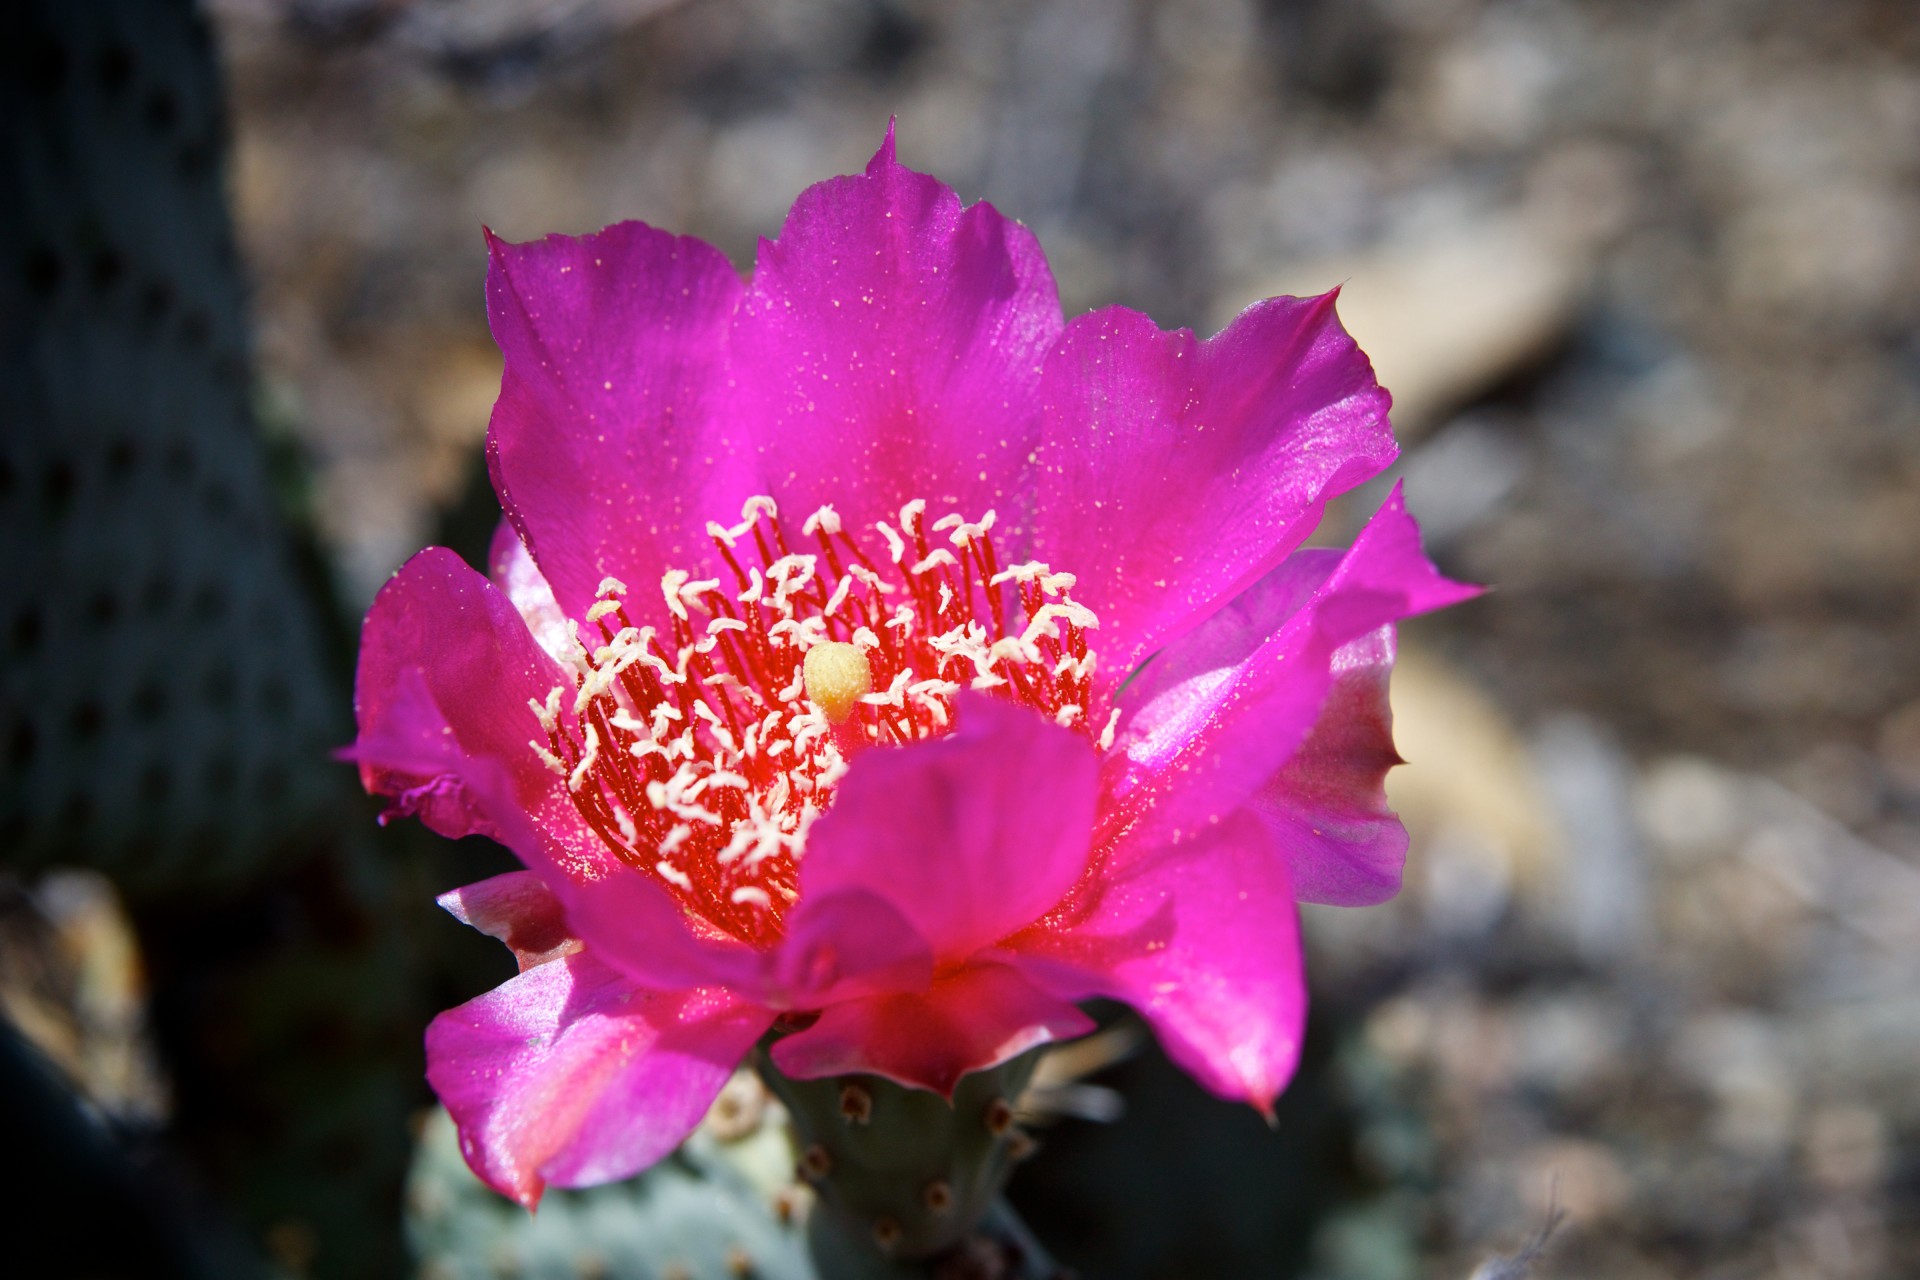 Pink cactus blossoms show color in life in the brown barren desert.